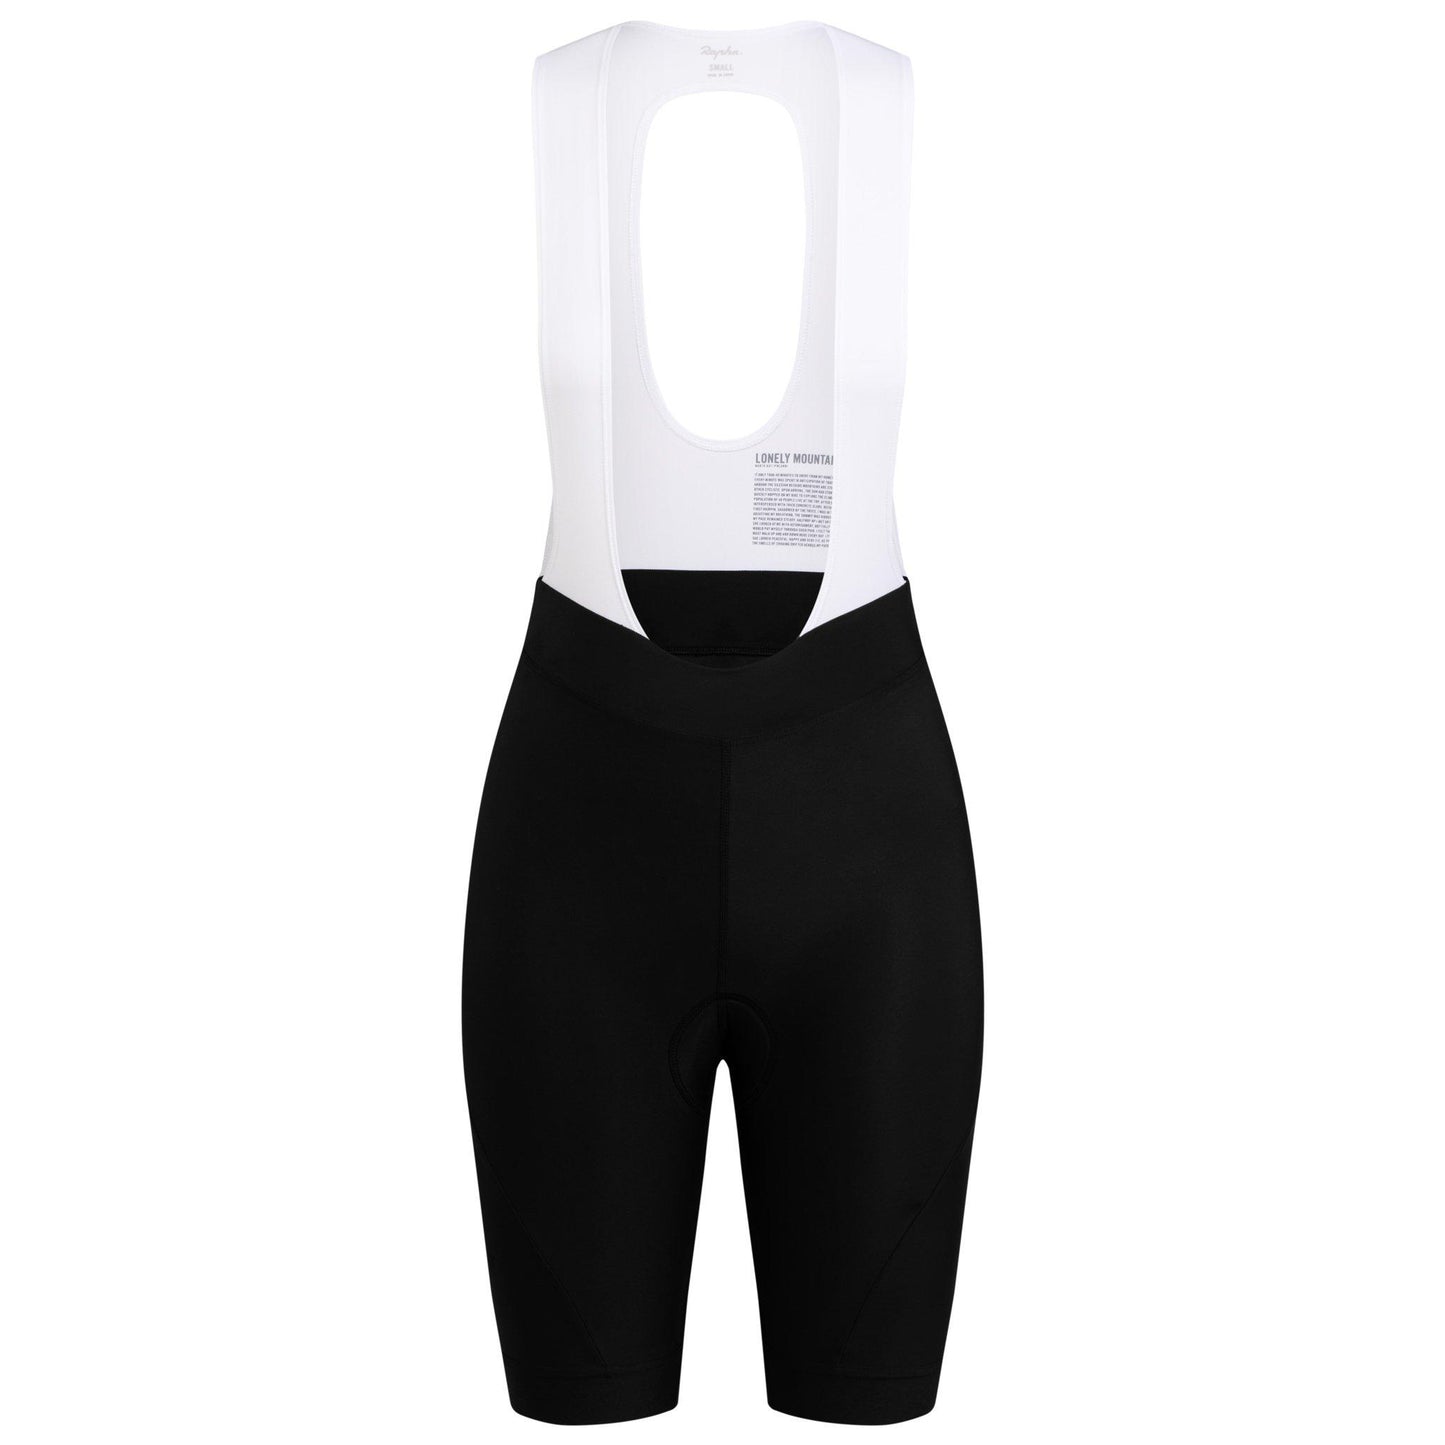 Rapha Women's Core Bib Shorts - Black/White buy online at Woolys Wheels Bike Shop Sydney with free delivery